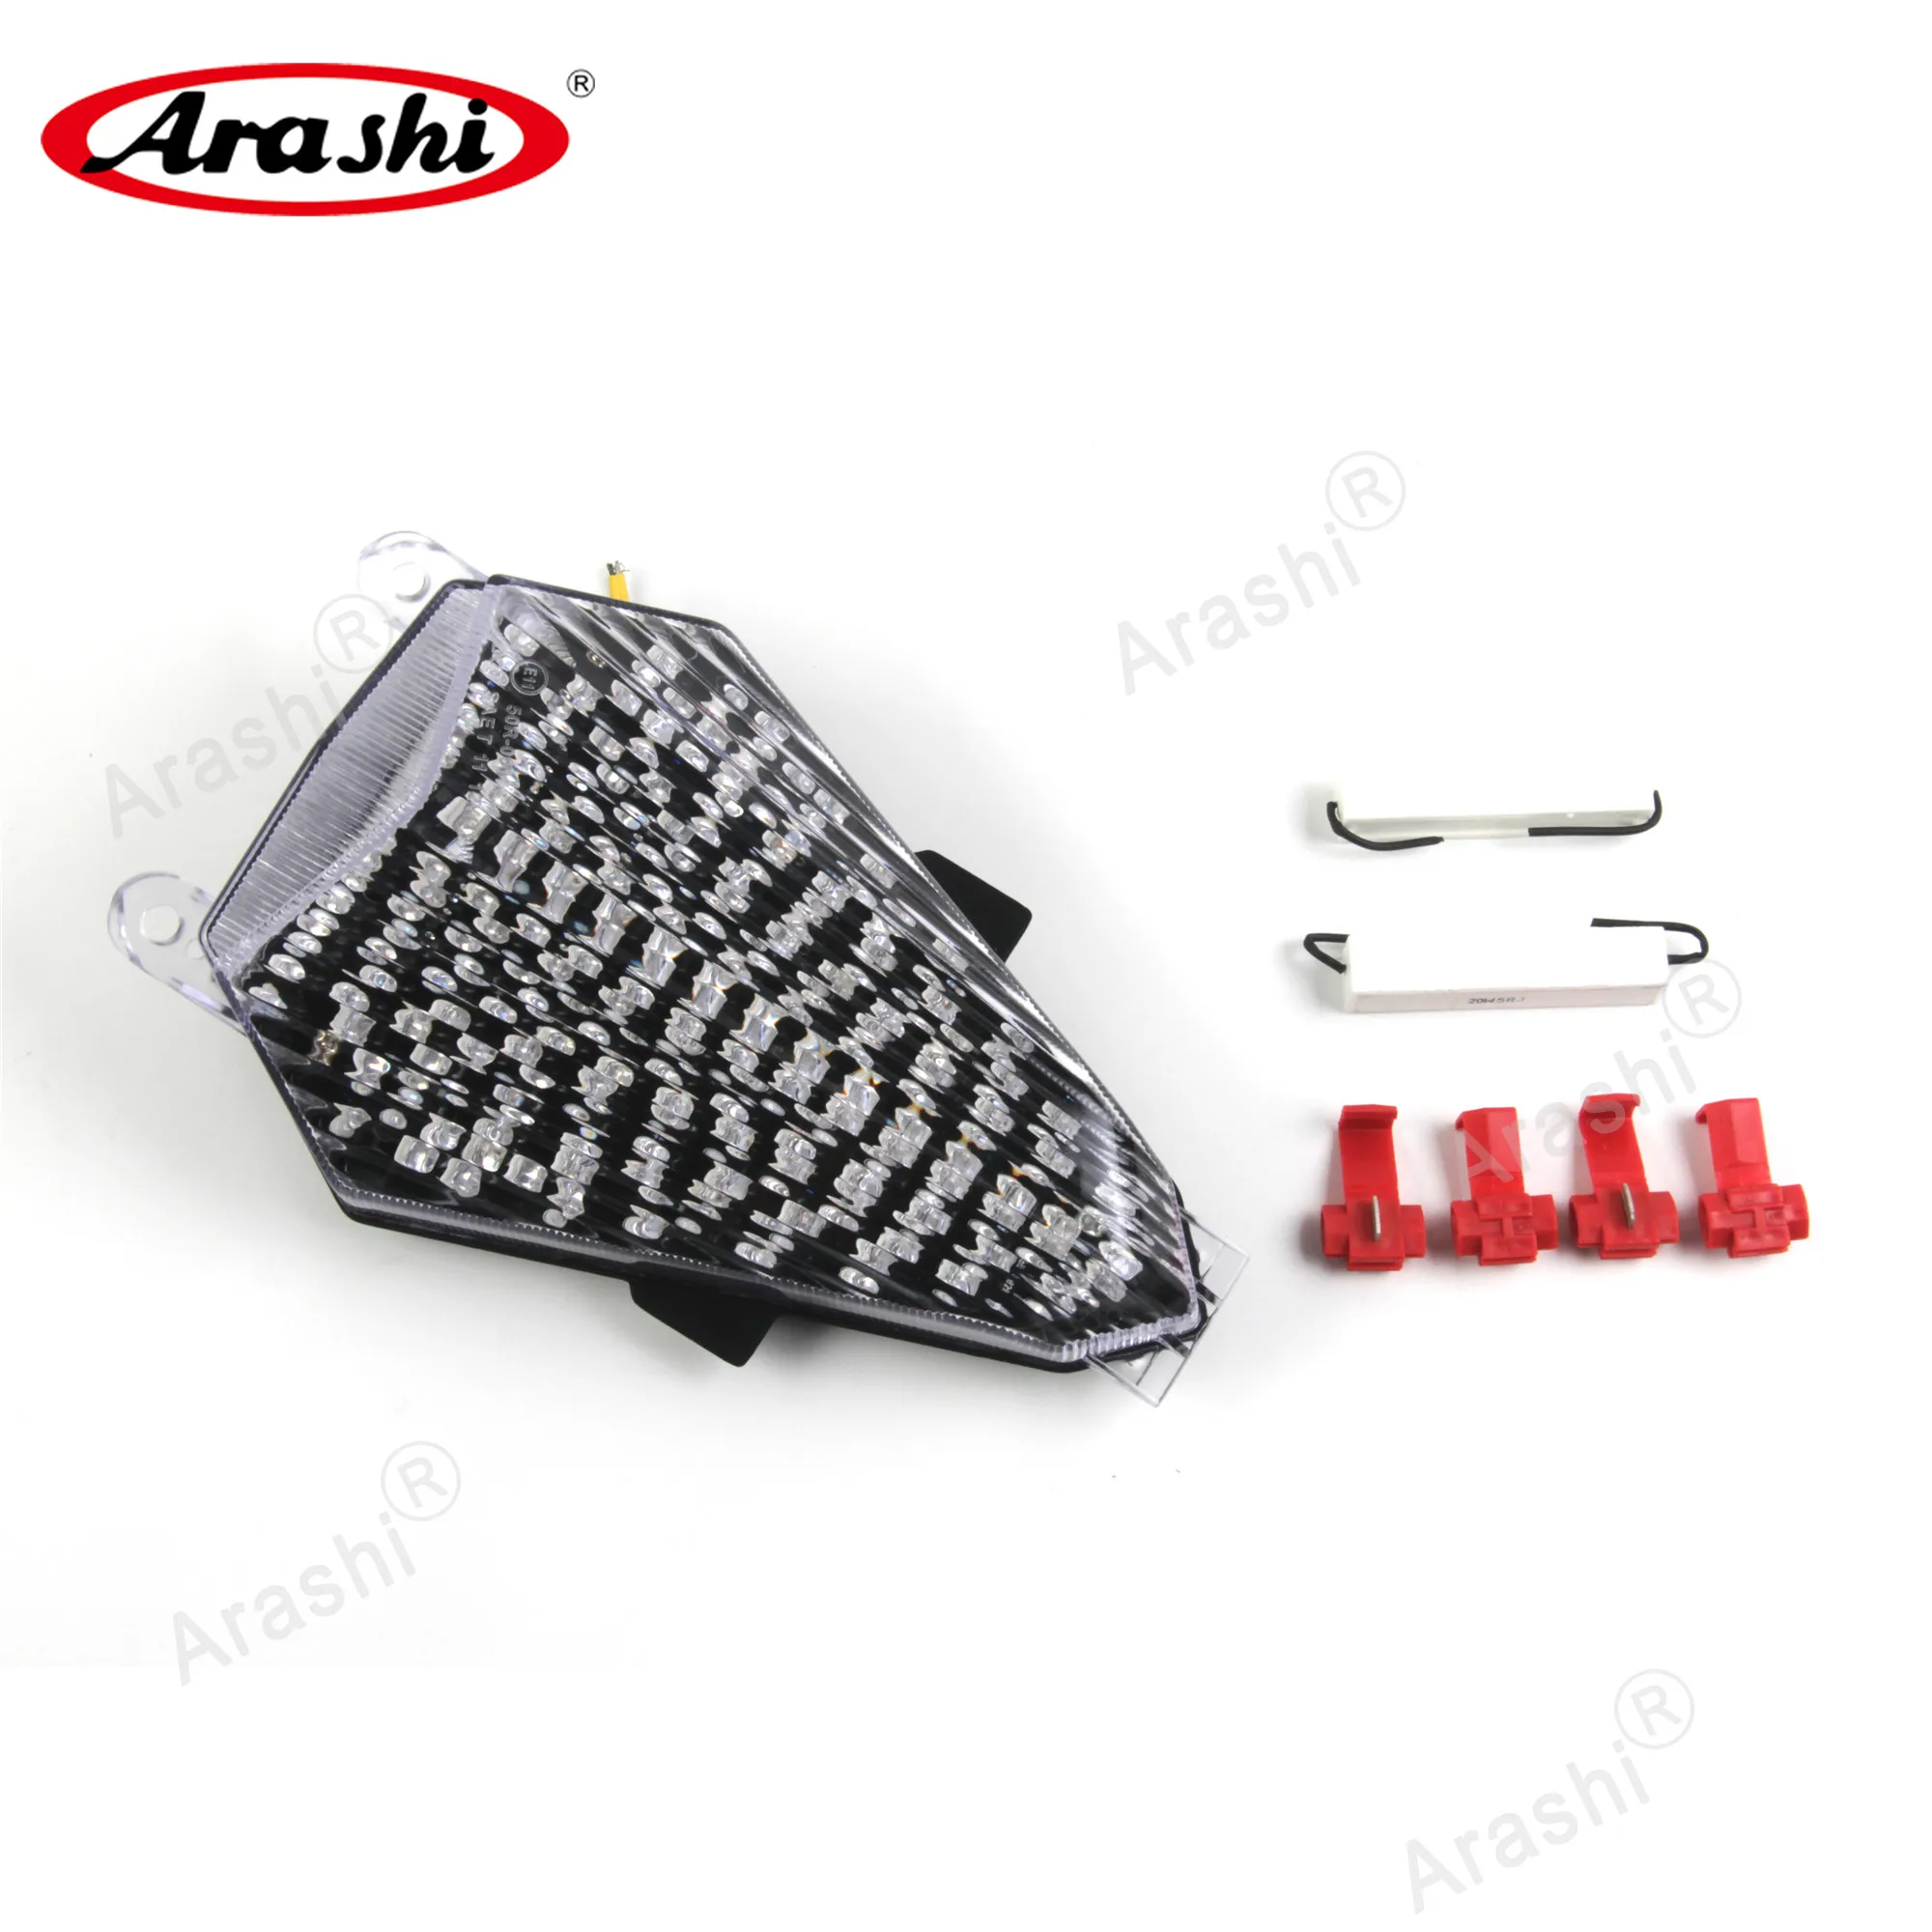 

Arashi Rear Stop Taillight For YAMAHA YZFR6 YZF-R6 YZF R6 R 6 2006 2007 Brake Turn Signals 3-in-1 Integrated LED Tail Light Lamp